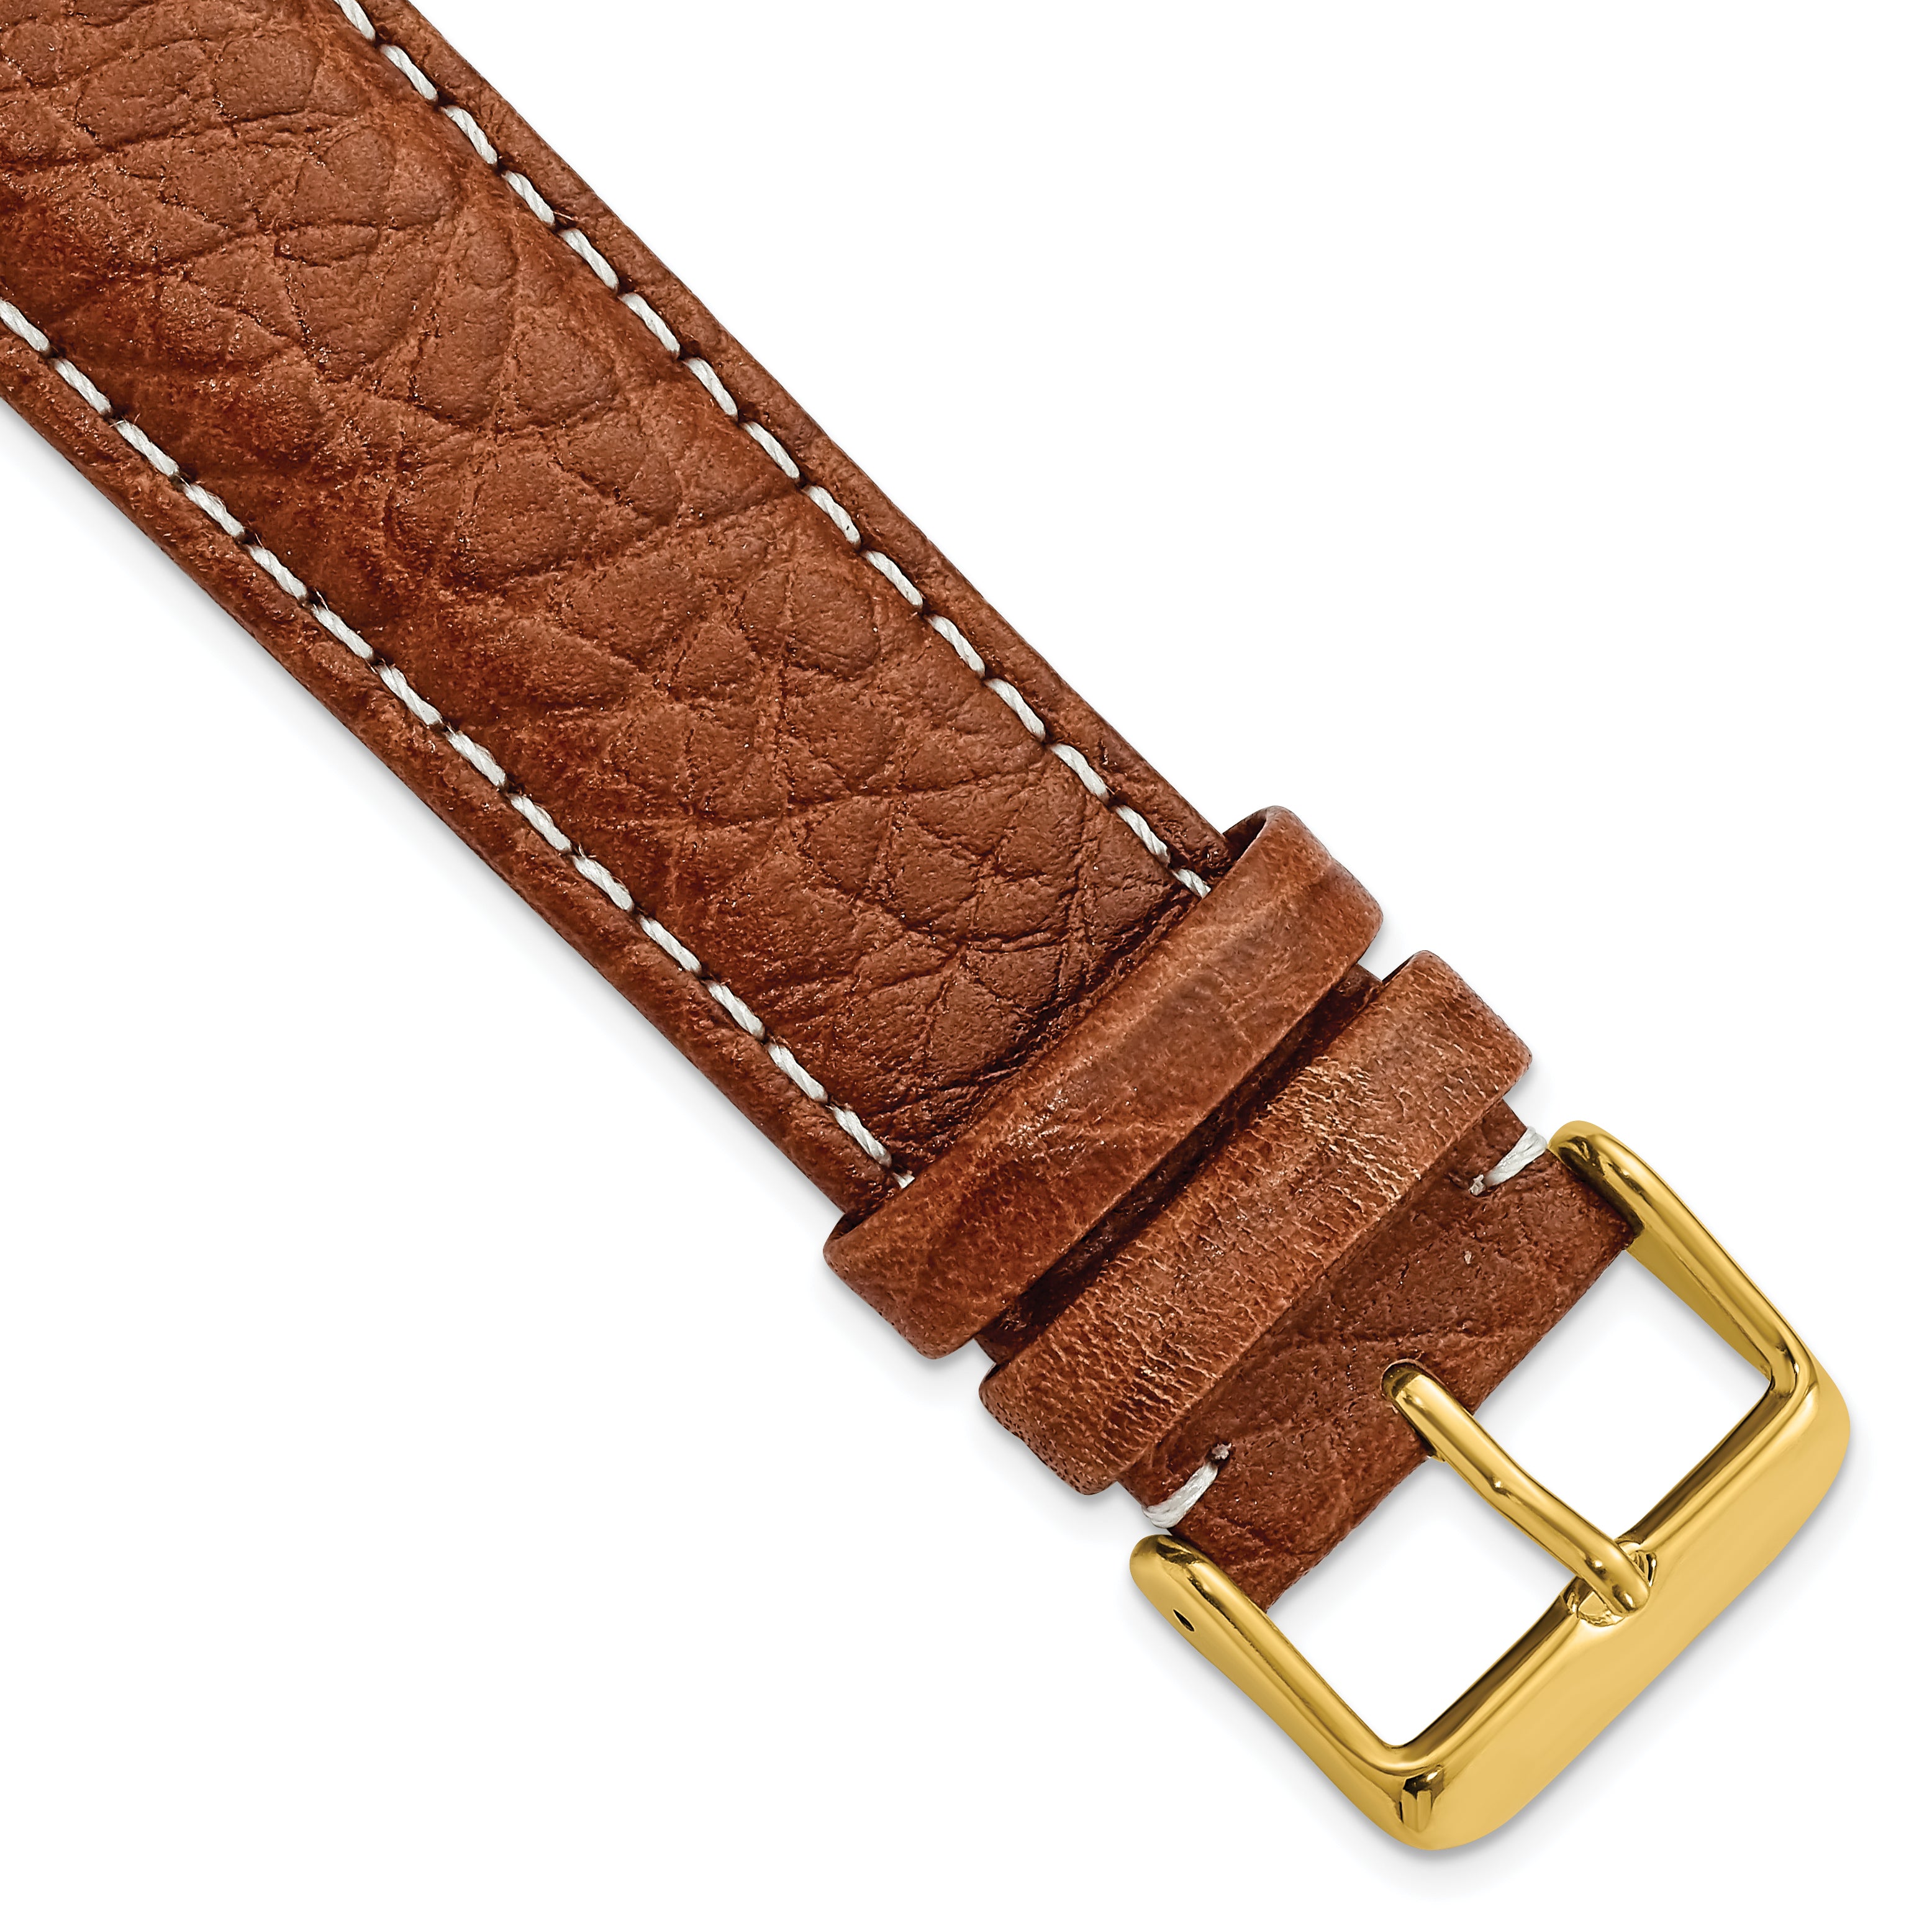 DeBeer 22mm Havana Sport Leather with White Stitching and Gold-tone Buckle 7.5 inch Watch Band